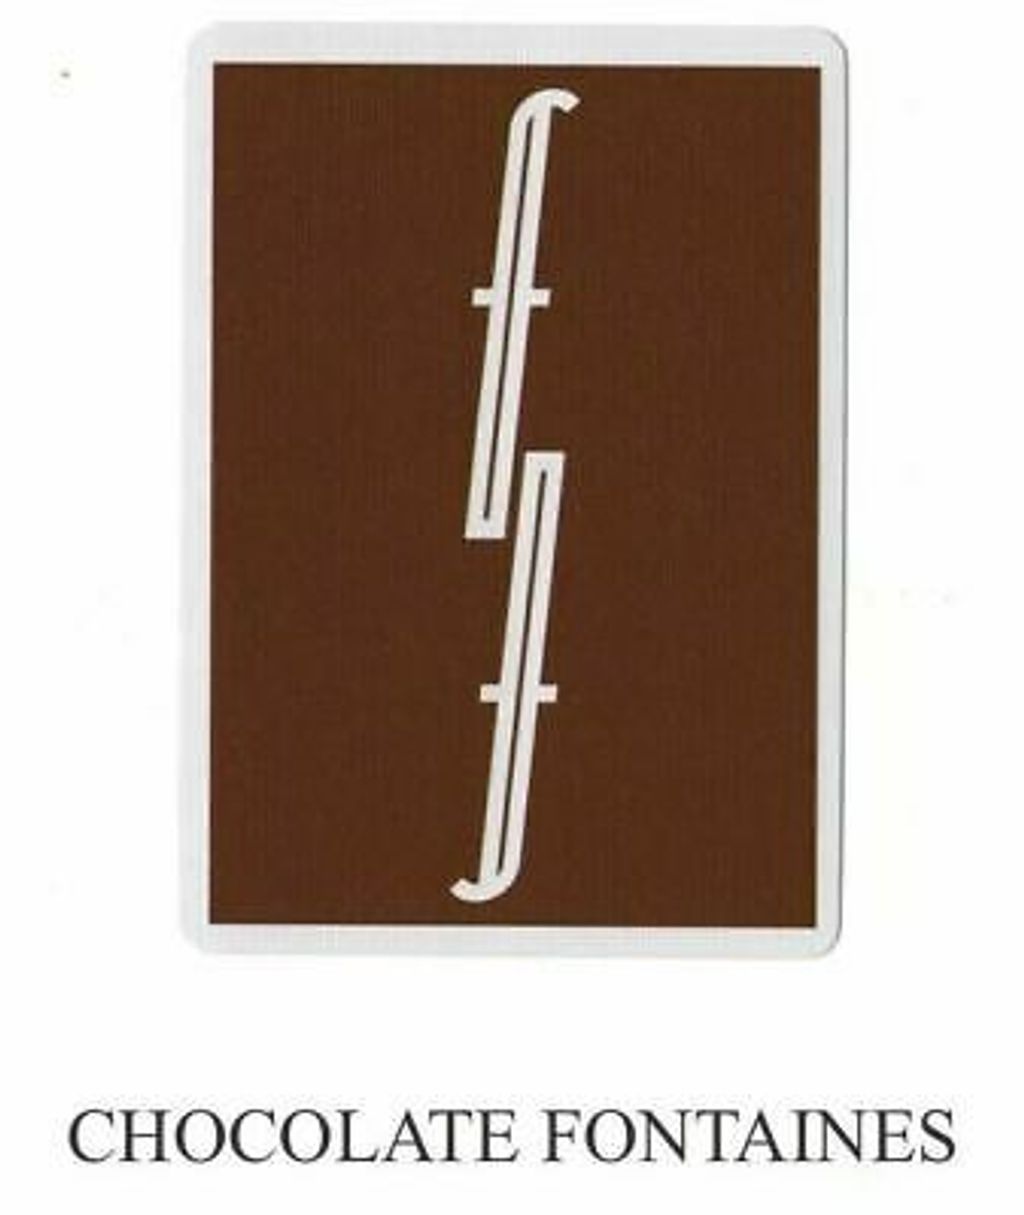 New-Chocolate-Fontaine-Playing-Cards-Deck-anyone.jpg